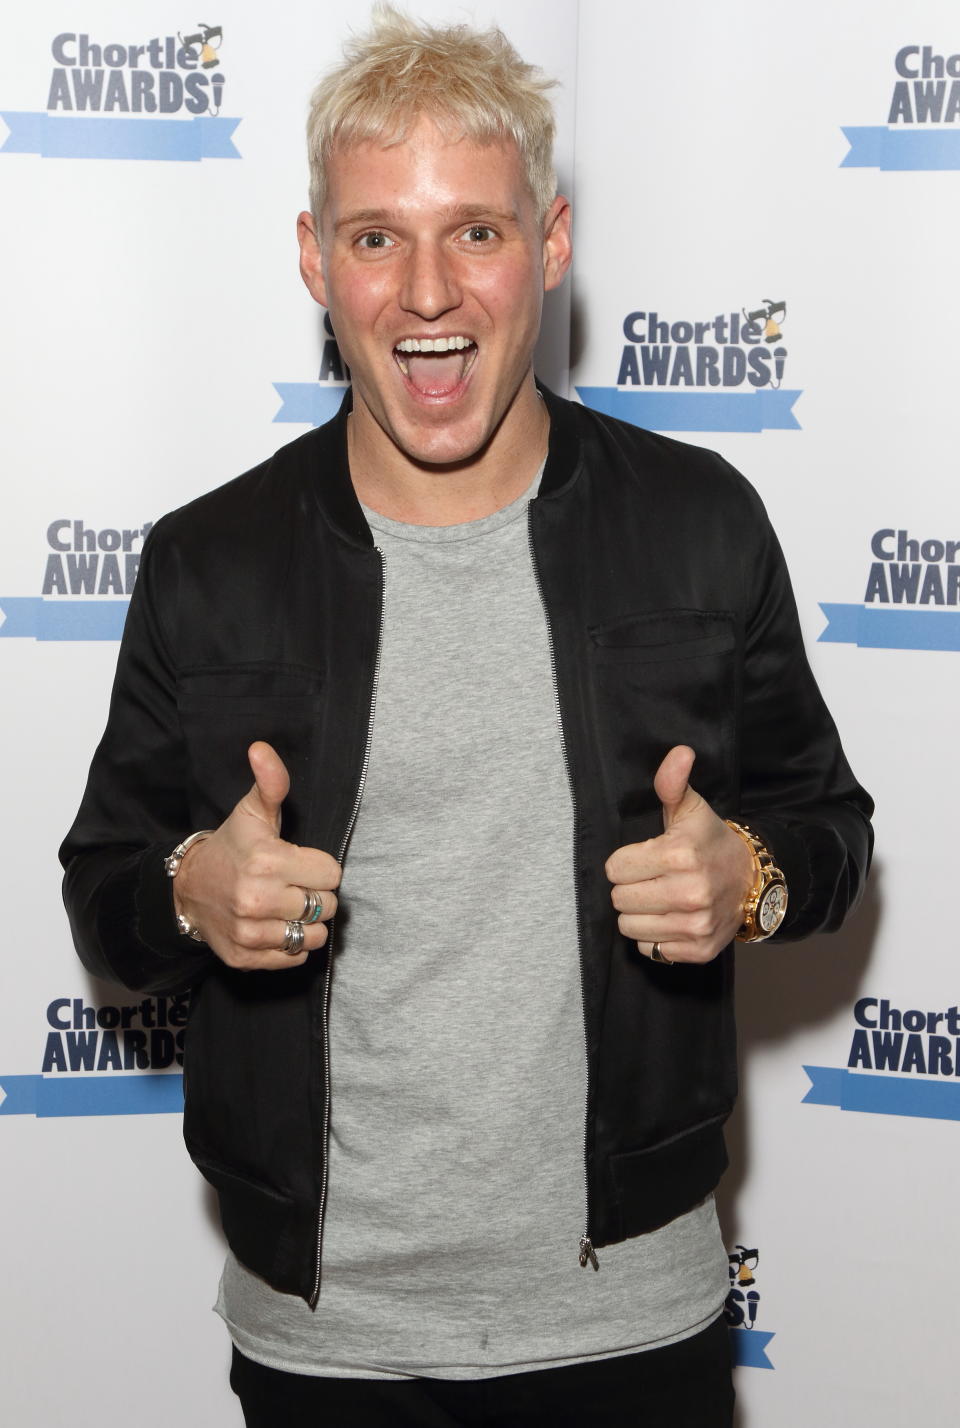 LONDON, UNITED KINGDOM - 2019/03/18: Jamie Laing at the Chortle Comedy Awards at FEST, Camden Town. (Photo by Keith Mayhew/SOPA Images/LightRocket via Getty Images)